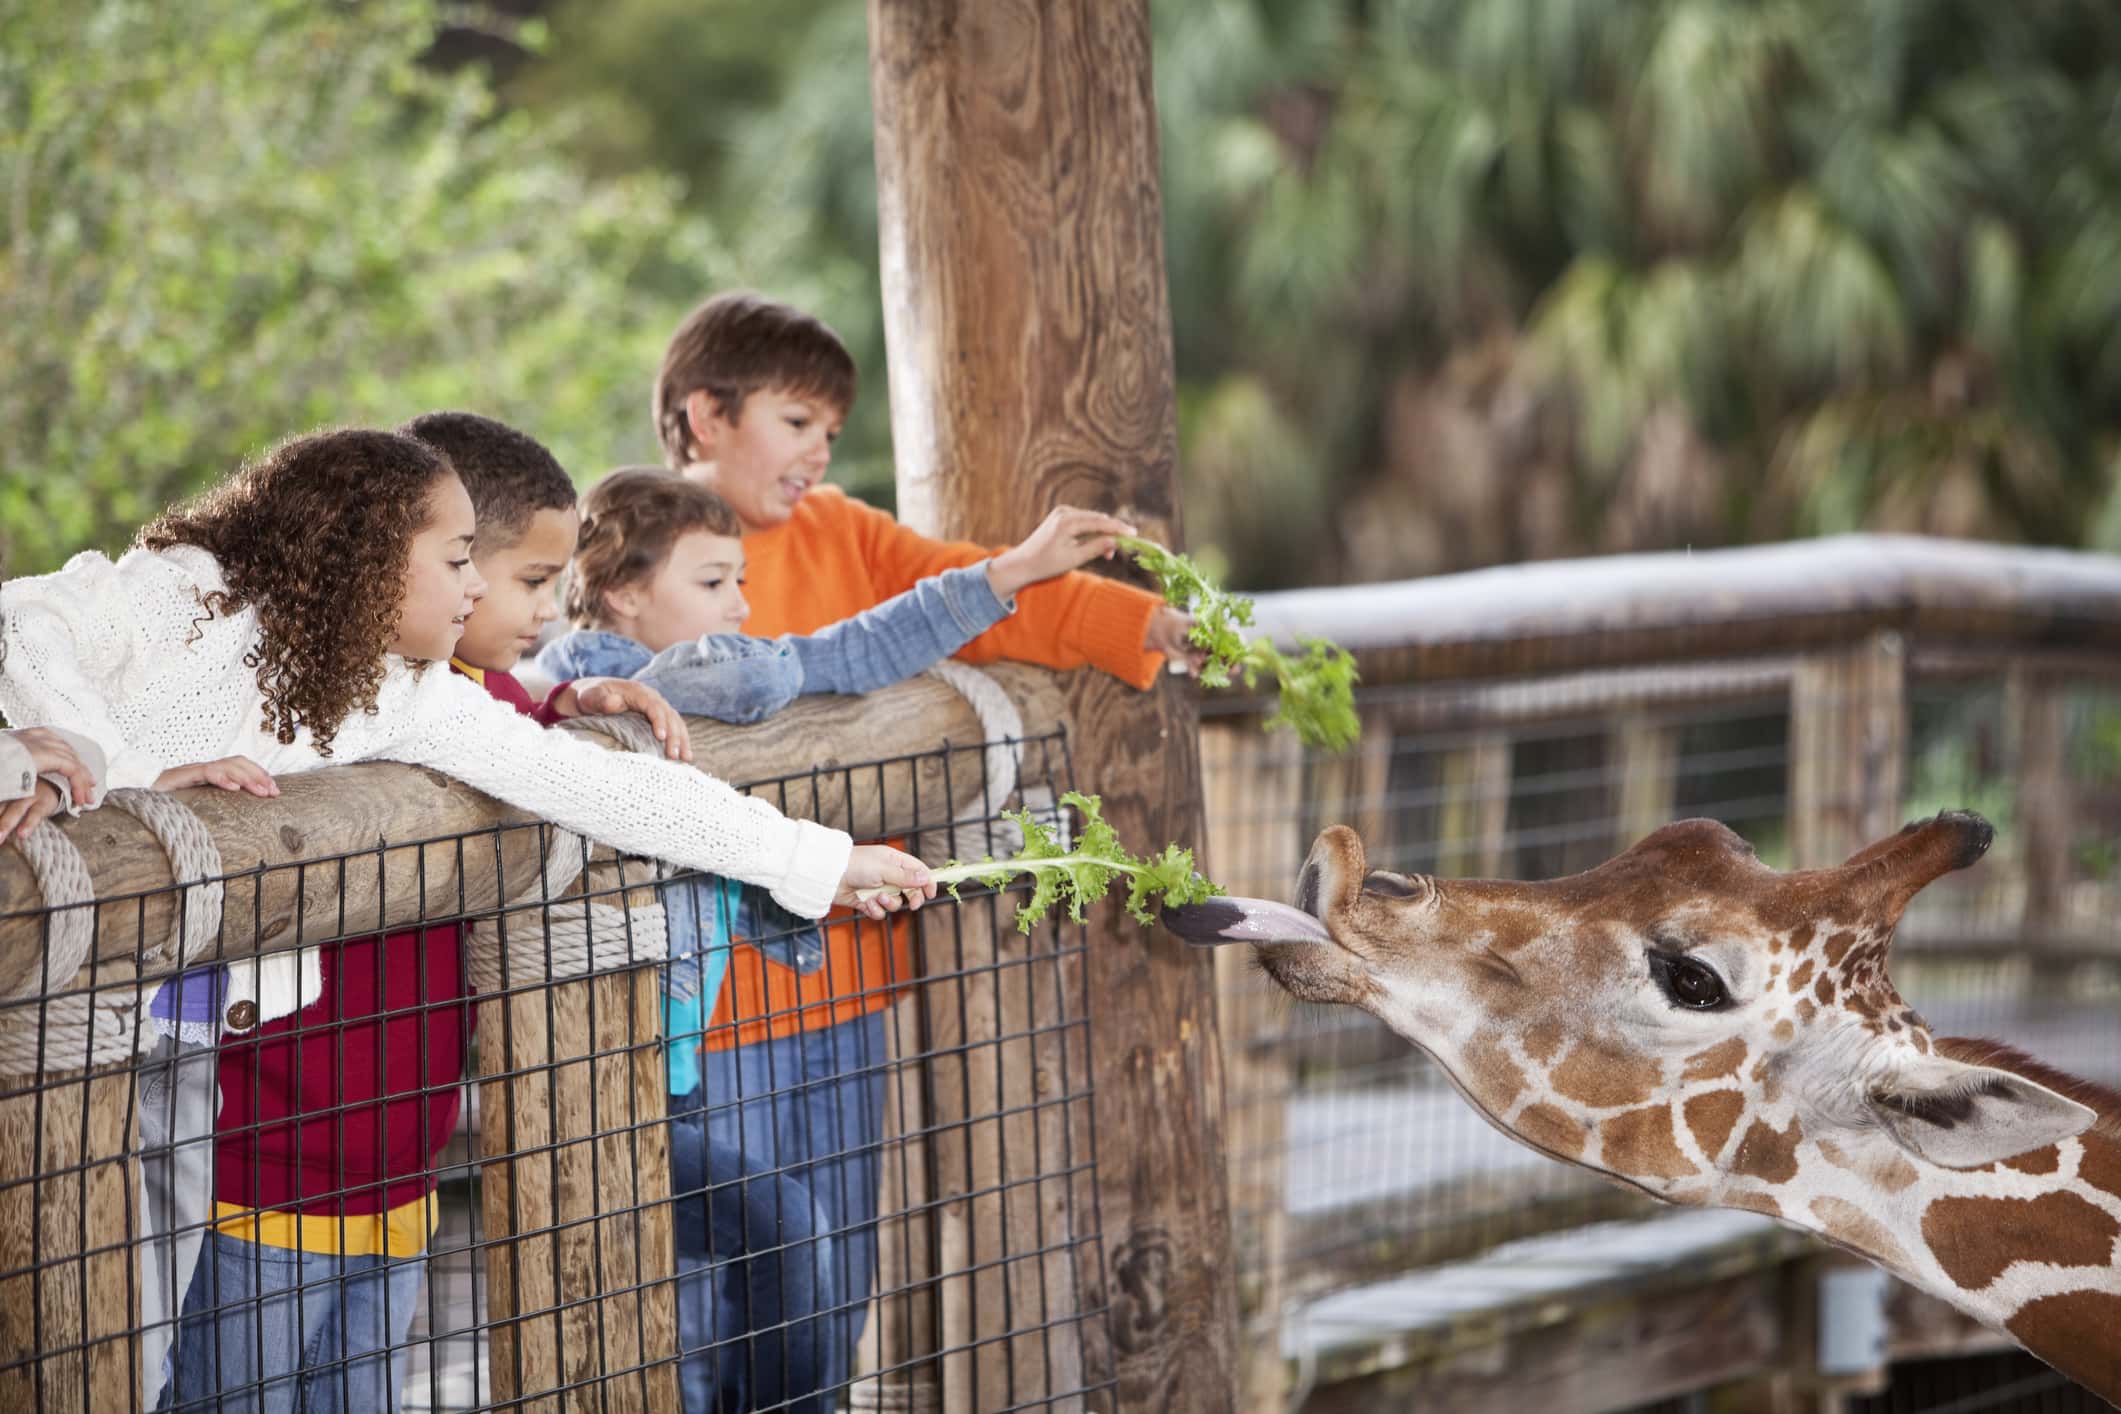 Multi-ethnic group of children at zoo feeding giraffe. Focus on giraffe and the two children in foreground.